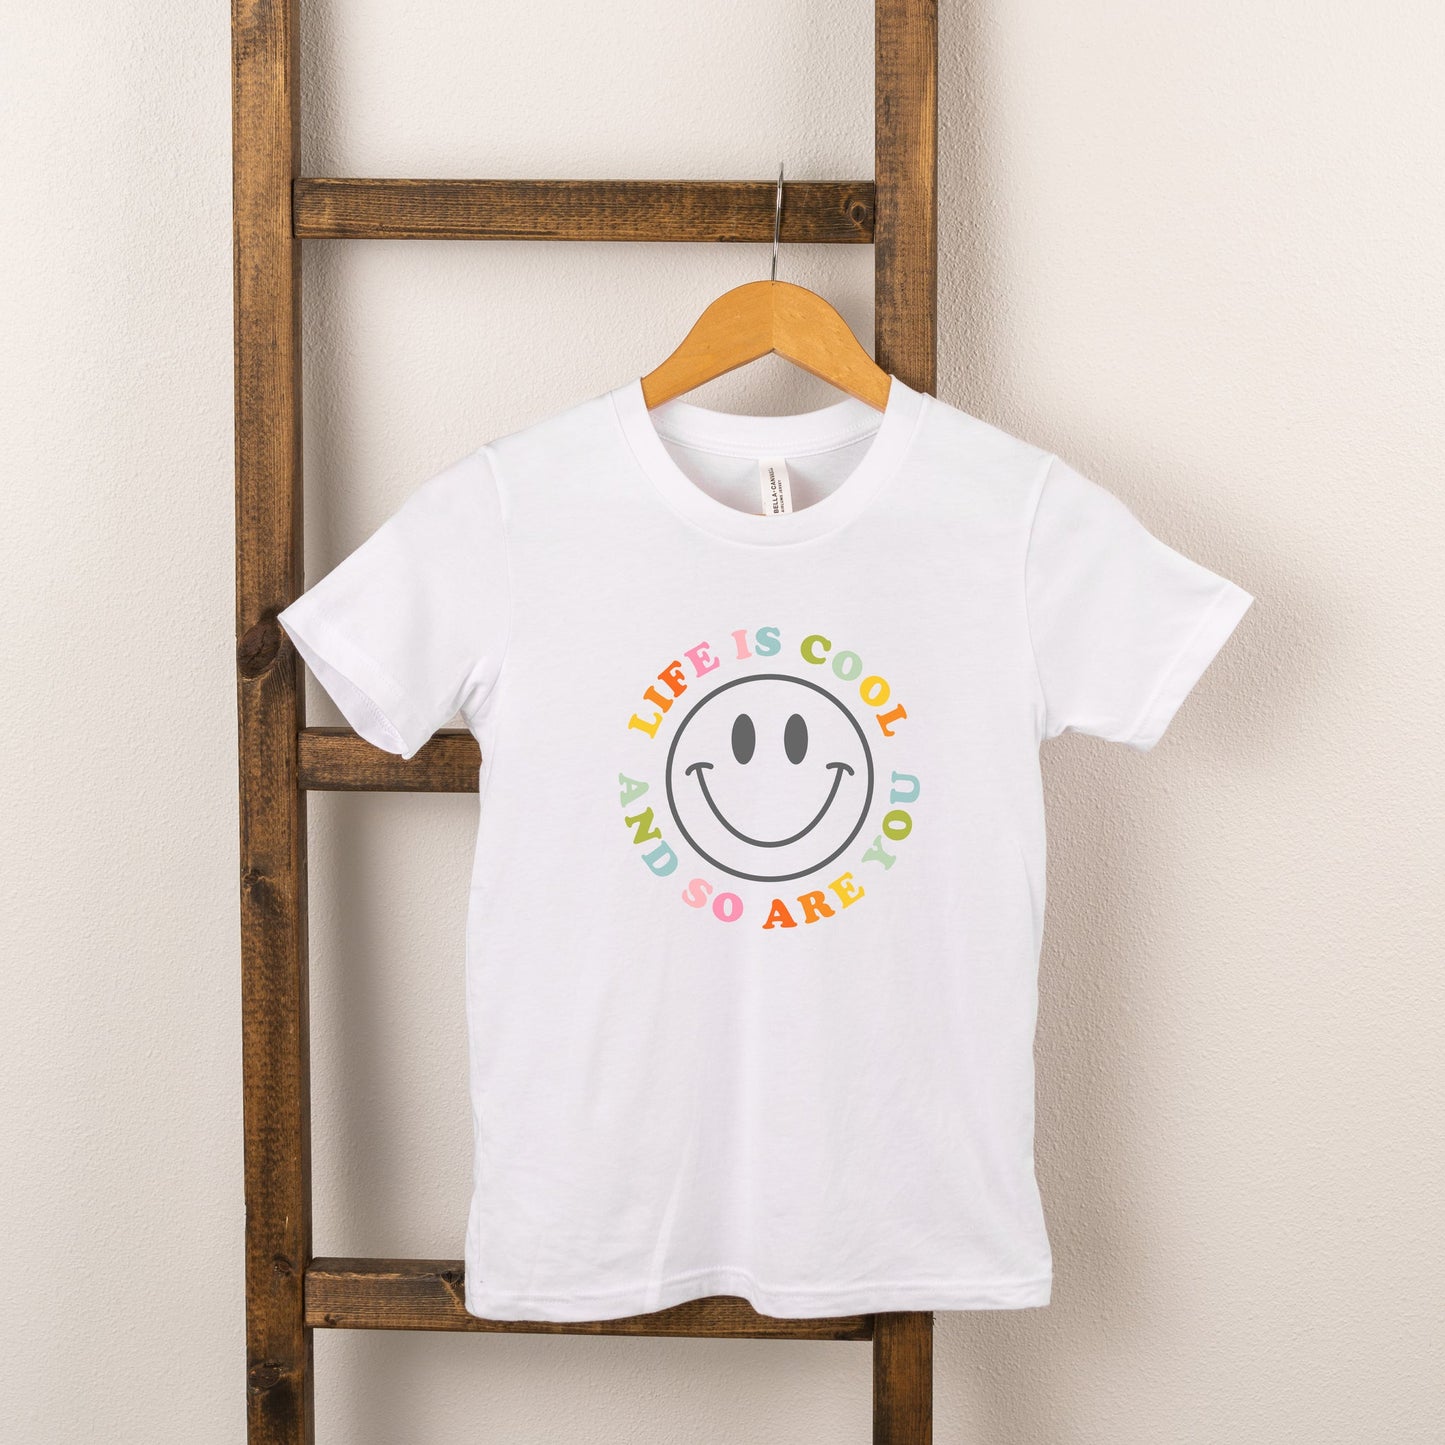 Life Is Cool Short Sleeve Tee, White